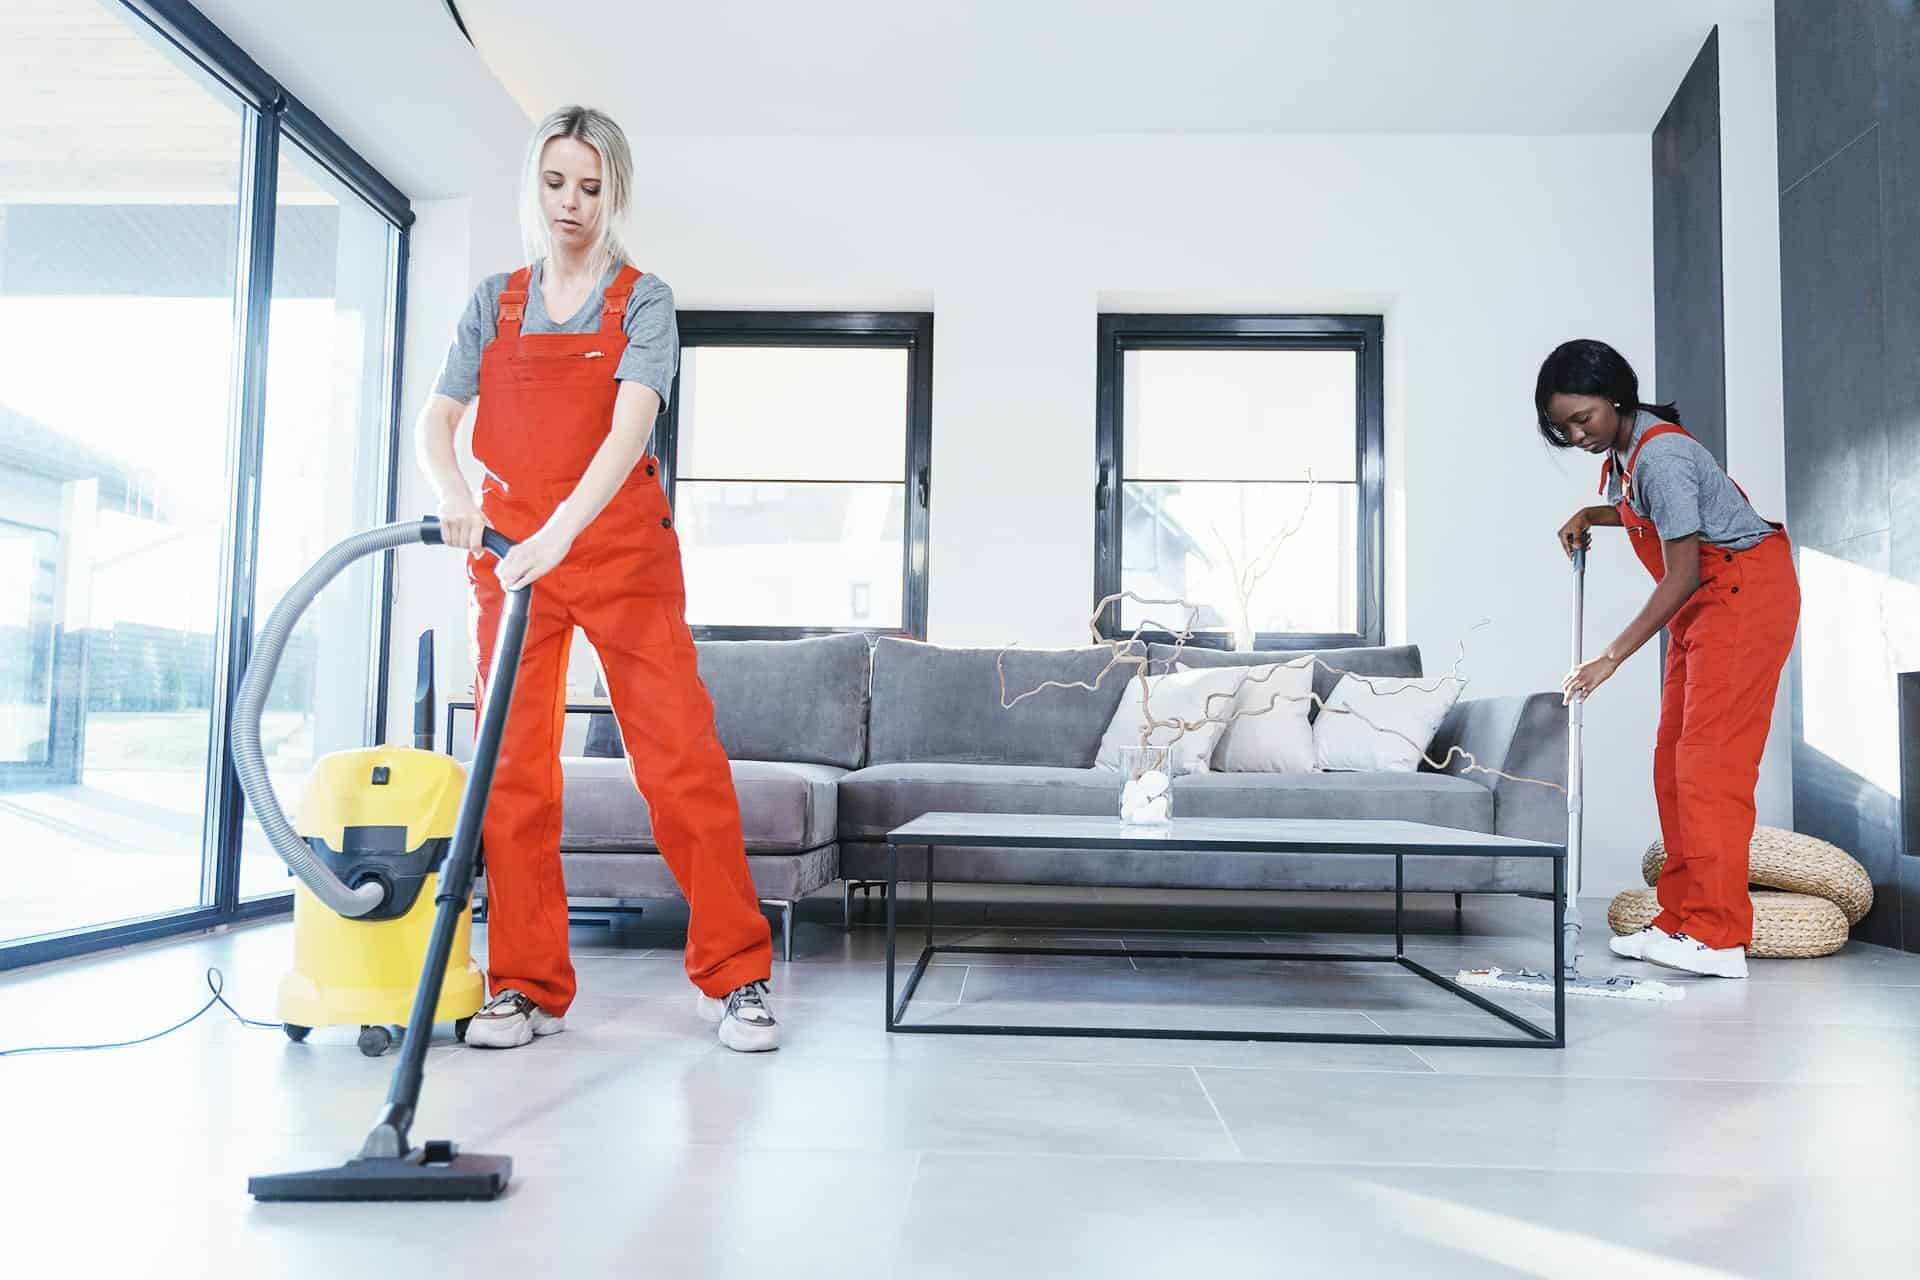 End Of Tenancy Cleans Shores Cleaning Services, Professional Domestic and Commercial Cleaners Lytham, St Anne's, Blackpool & The Fylde Coast